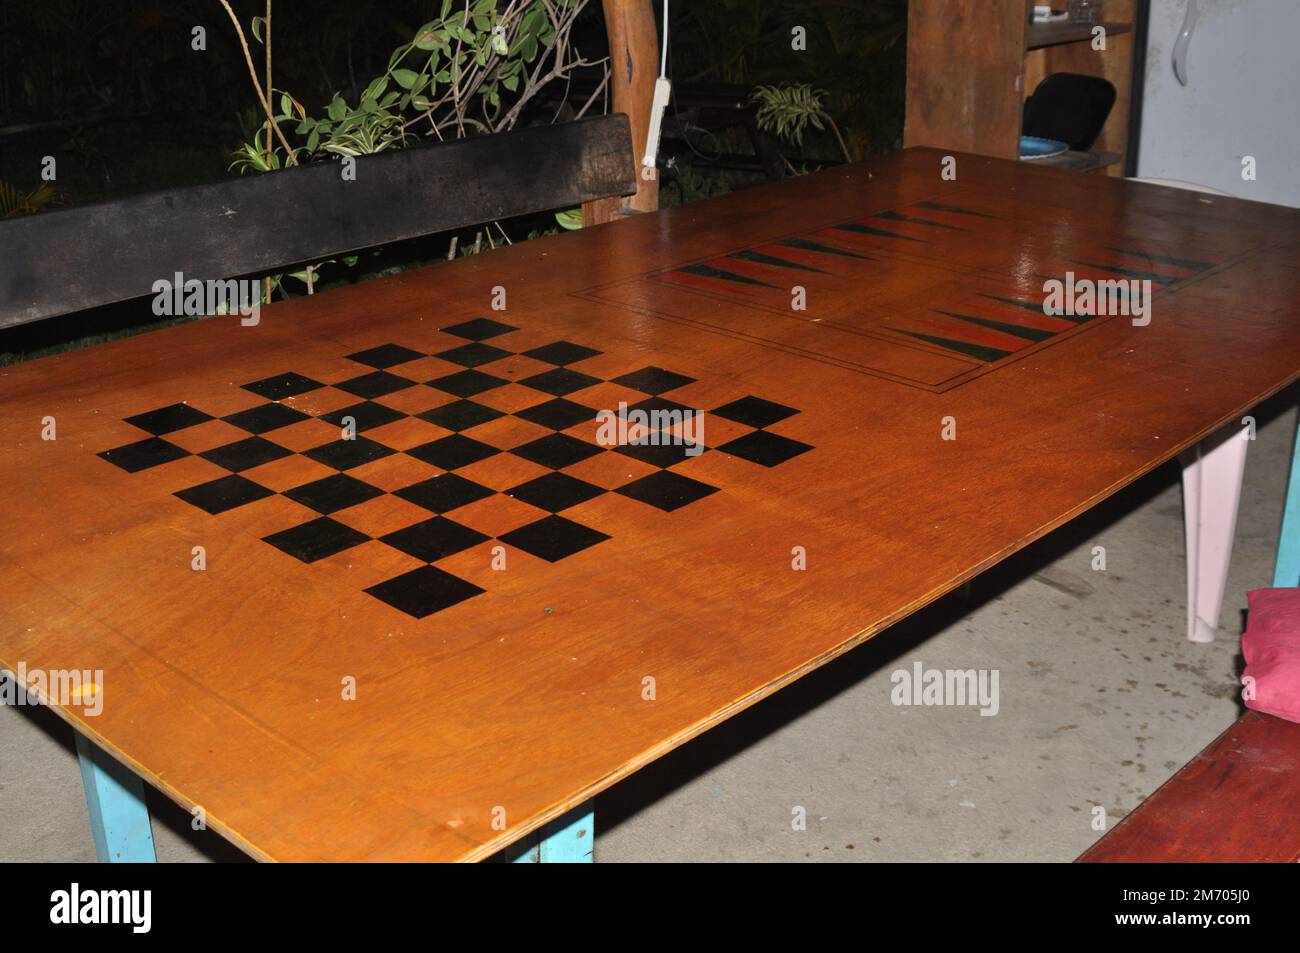 A Table with Chess and Backgammon Boards Stock Photo